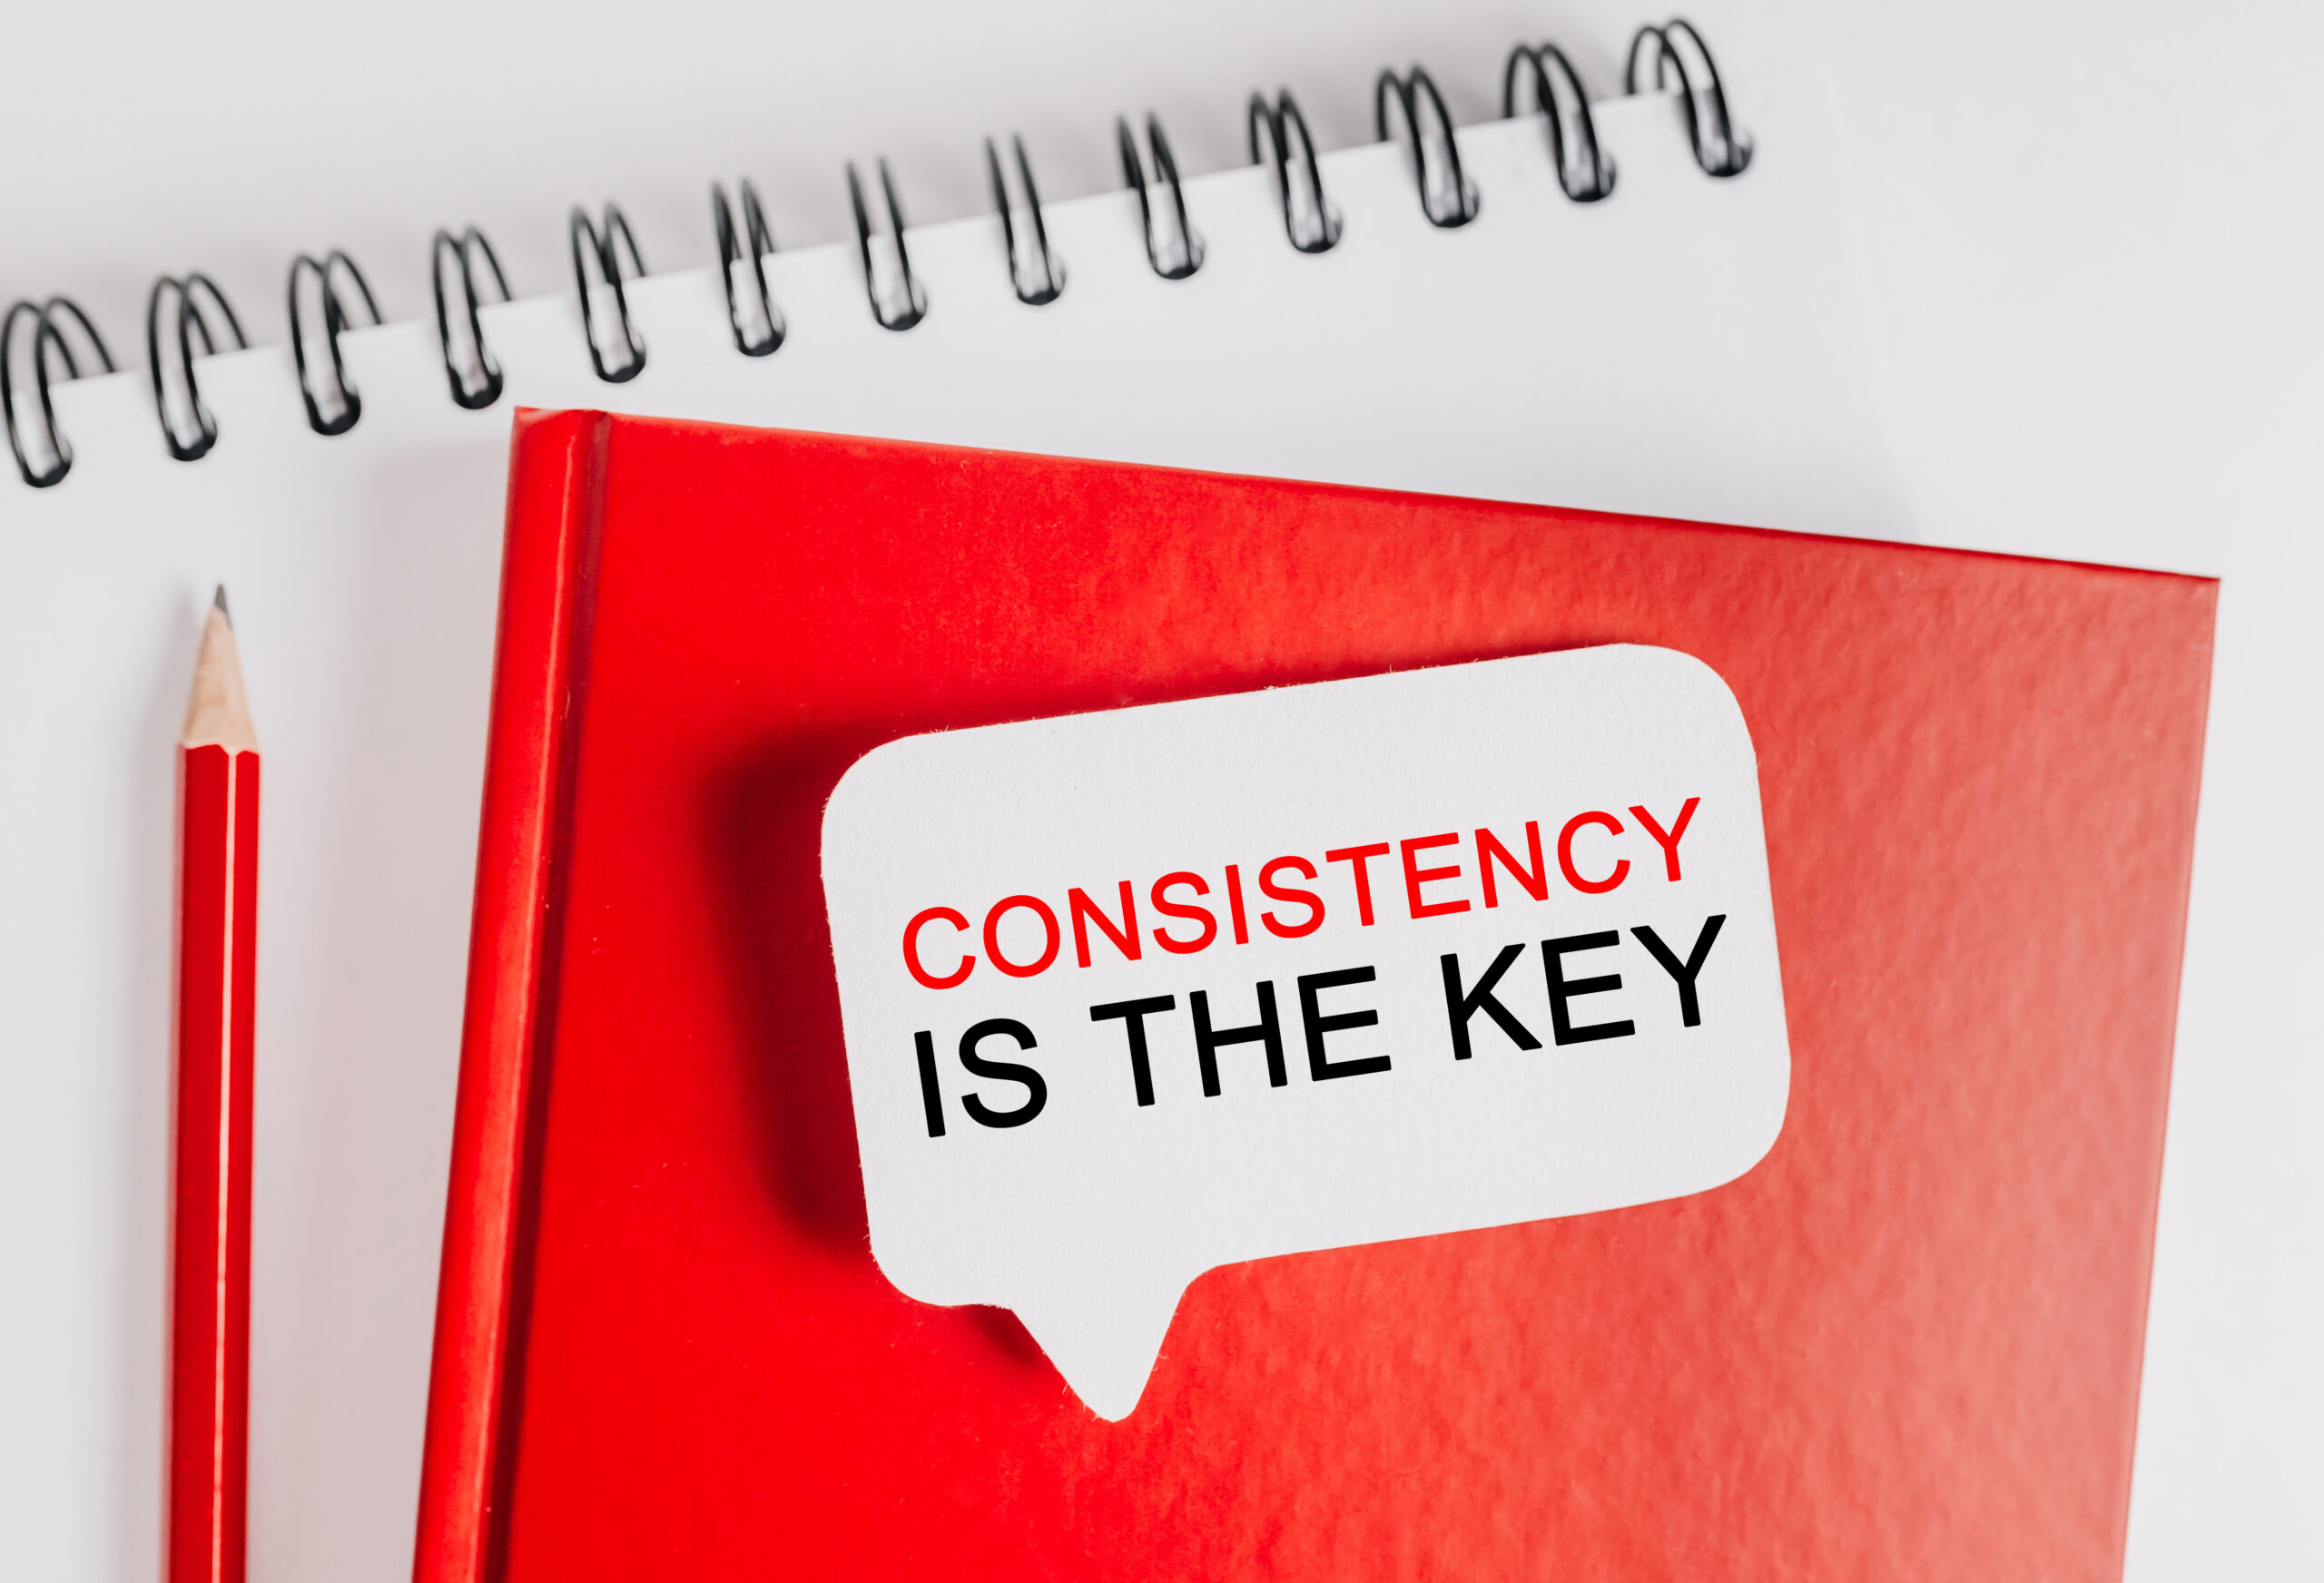 How Do I Market My Book? - Staying Consistent and Persistent